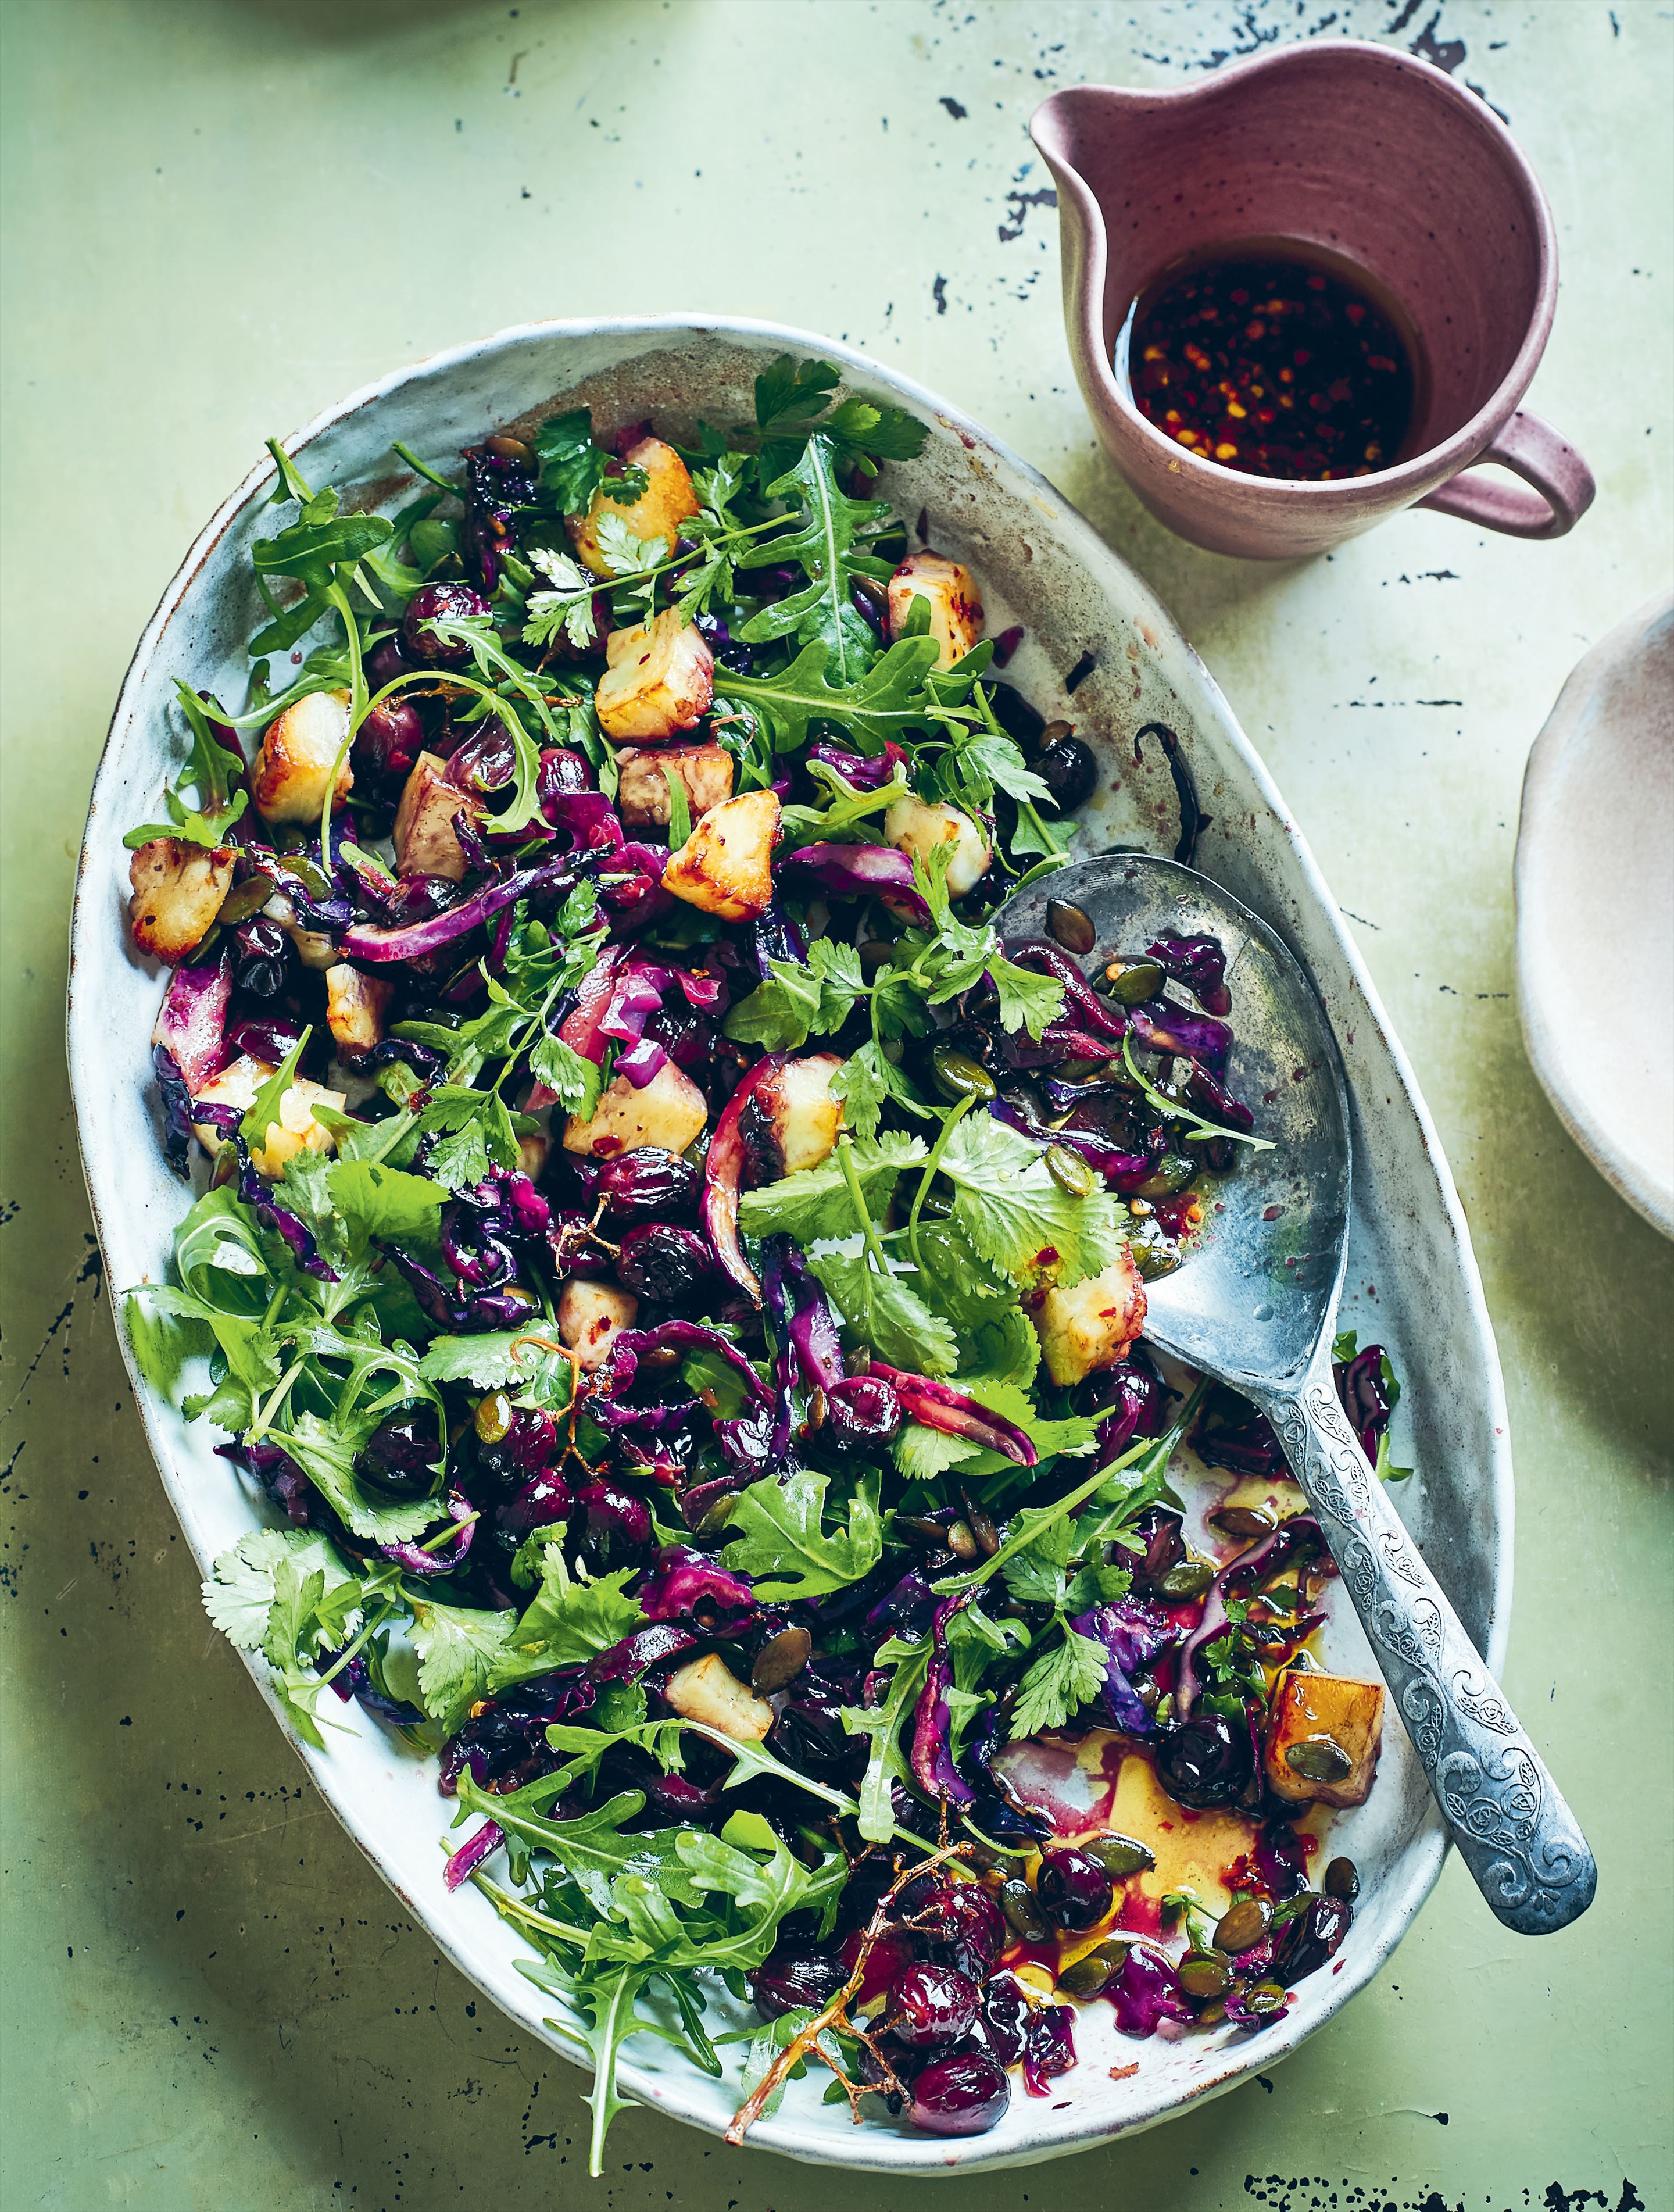 Warm salad of red cabbage, grapes and halloumi